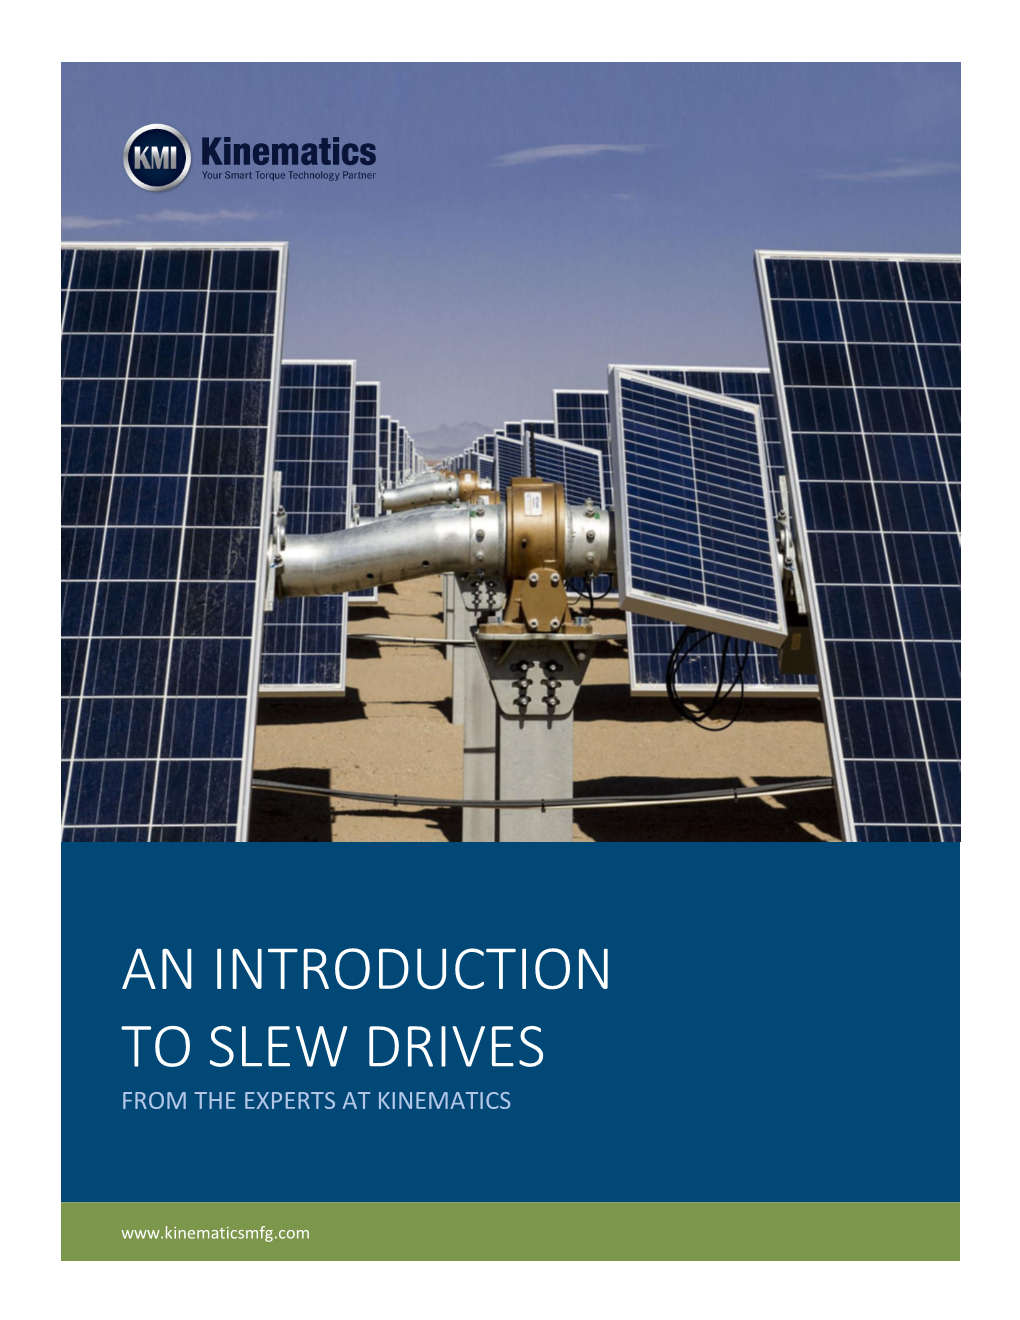 An Introduction to Slew Drives from the Experts at Kinematics